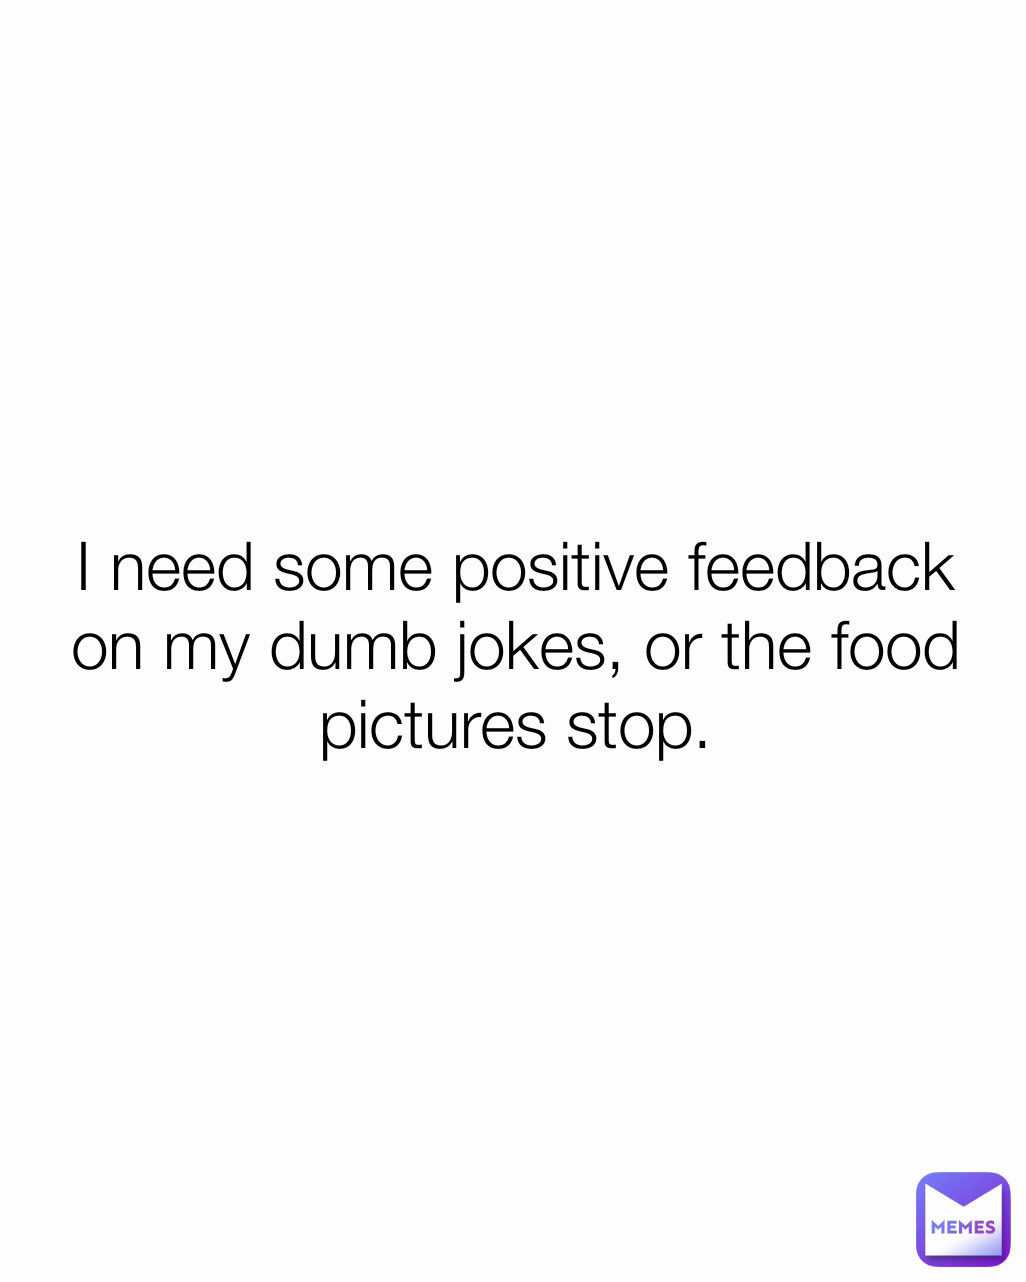 I need some positive feedback on my dumb jokes, or the food pictures stop.